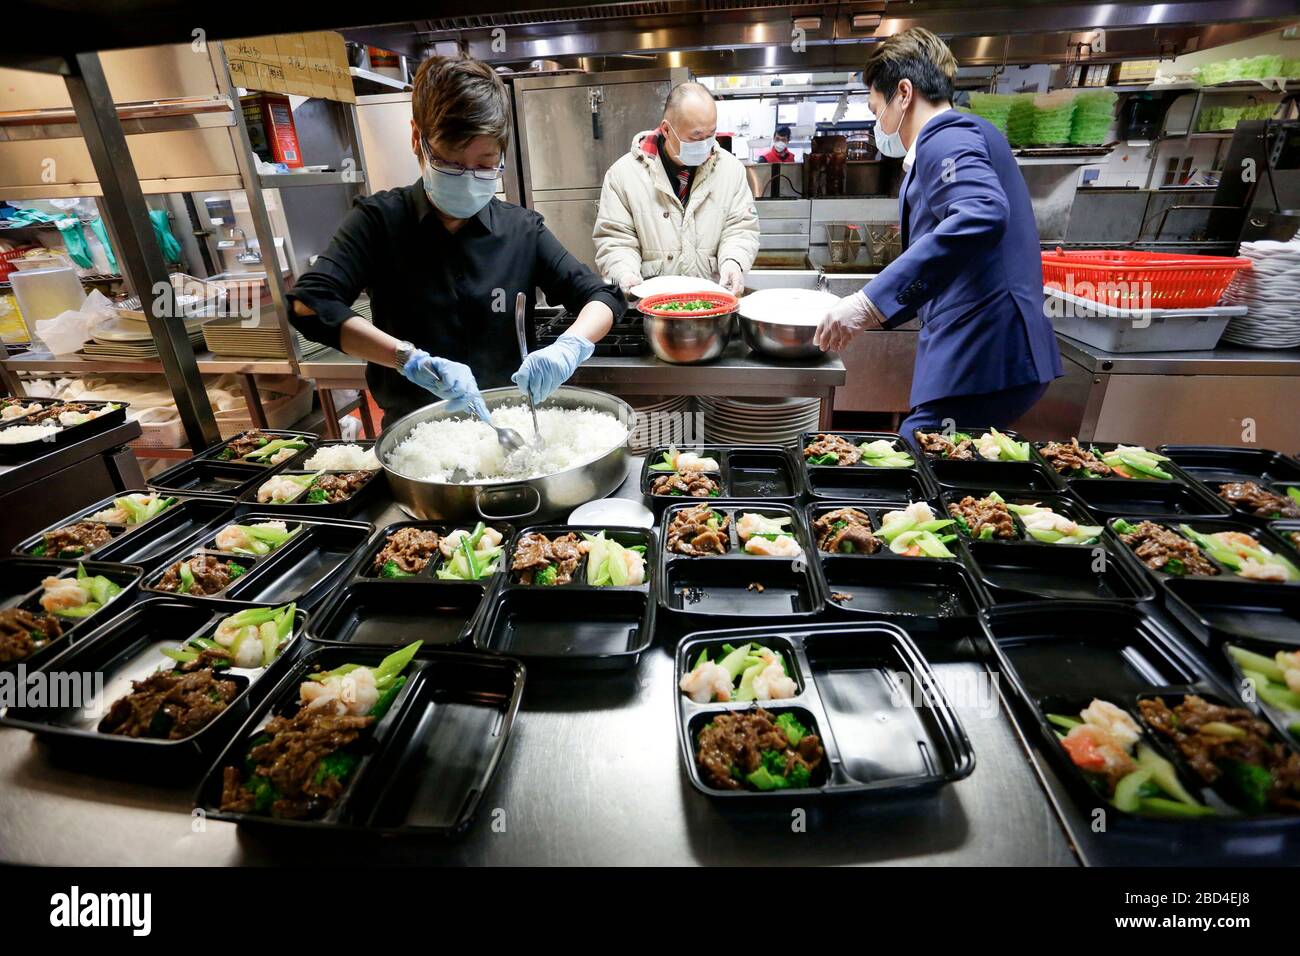 Vancouver, Canada. 6th Apr, 2020. Staff members of a Chinese restaurant prepare meal boxes inside the kitchen for the frontline workers of Vancouver General Hospital in Vancouver, Canada, April 6, 2020. The Canadian government is recruiting volunteers to support frontline healthcare workers to combat the COVID-19 crisis. Some local Chinese restaurants donated meals to the frontline healthcare workers fighting COVID-19. Credit: Liang Sen/Xinhua/Alamy Live News Stock Photo